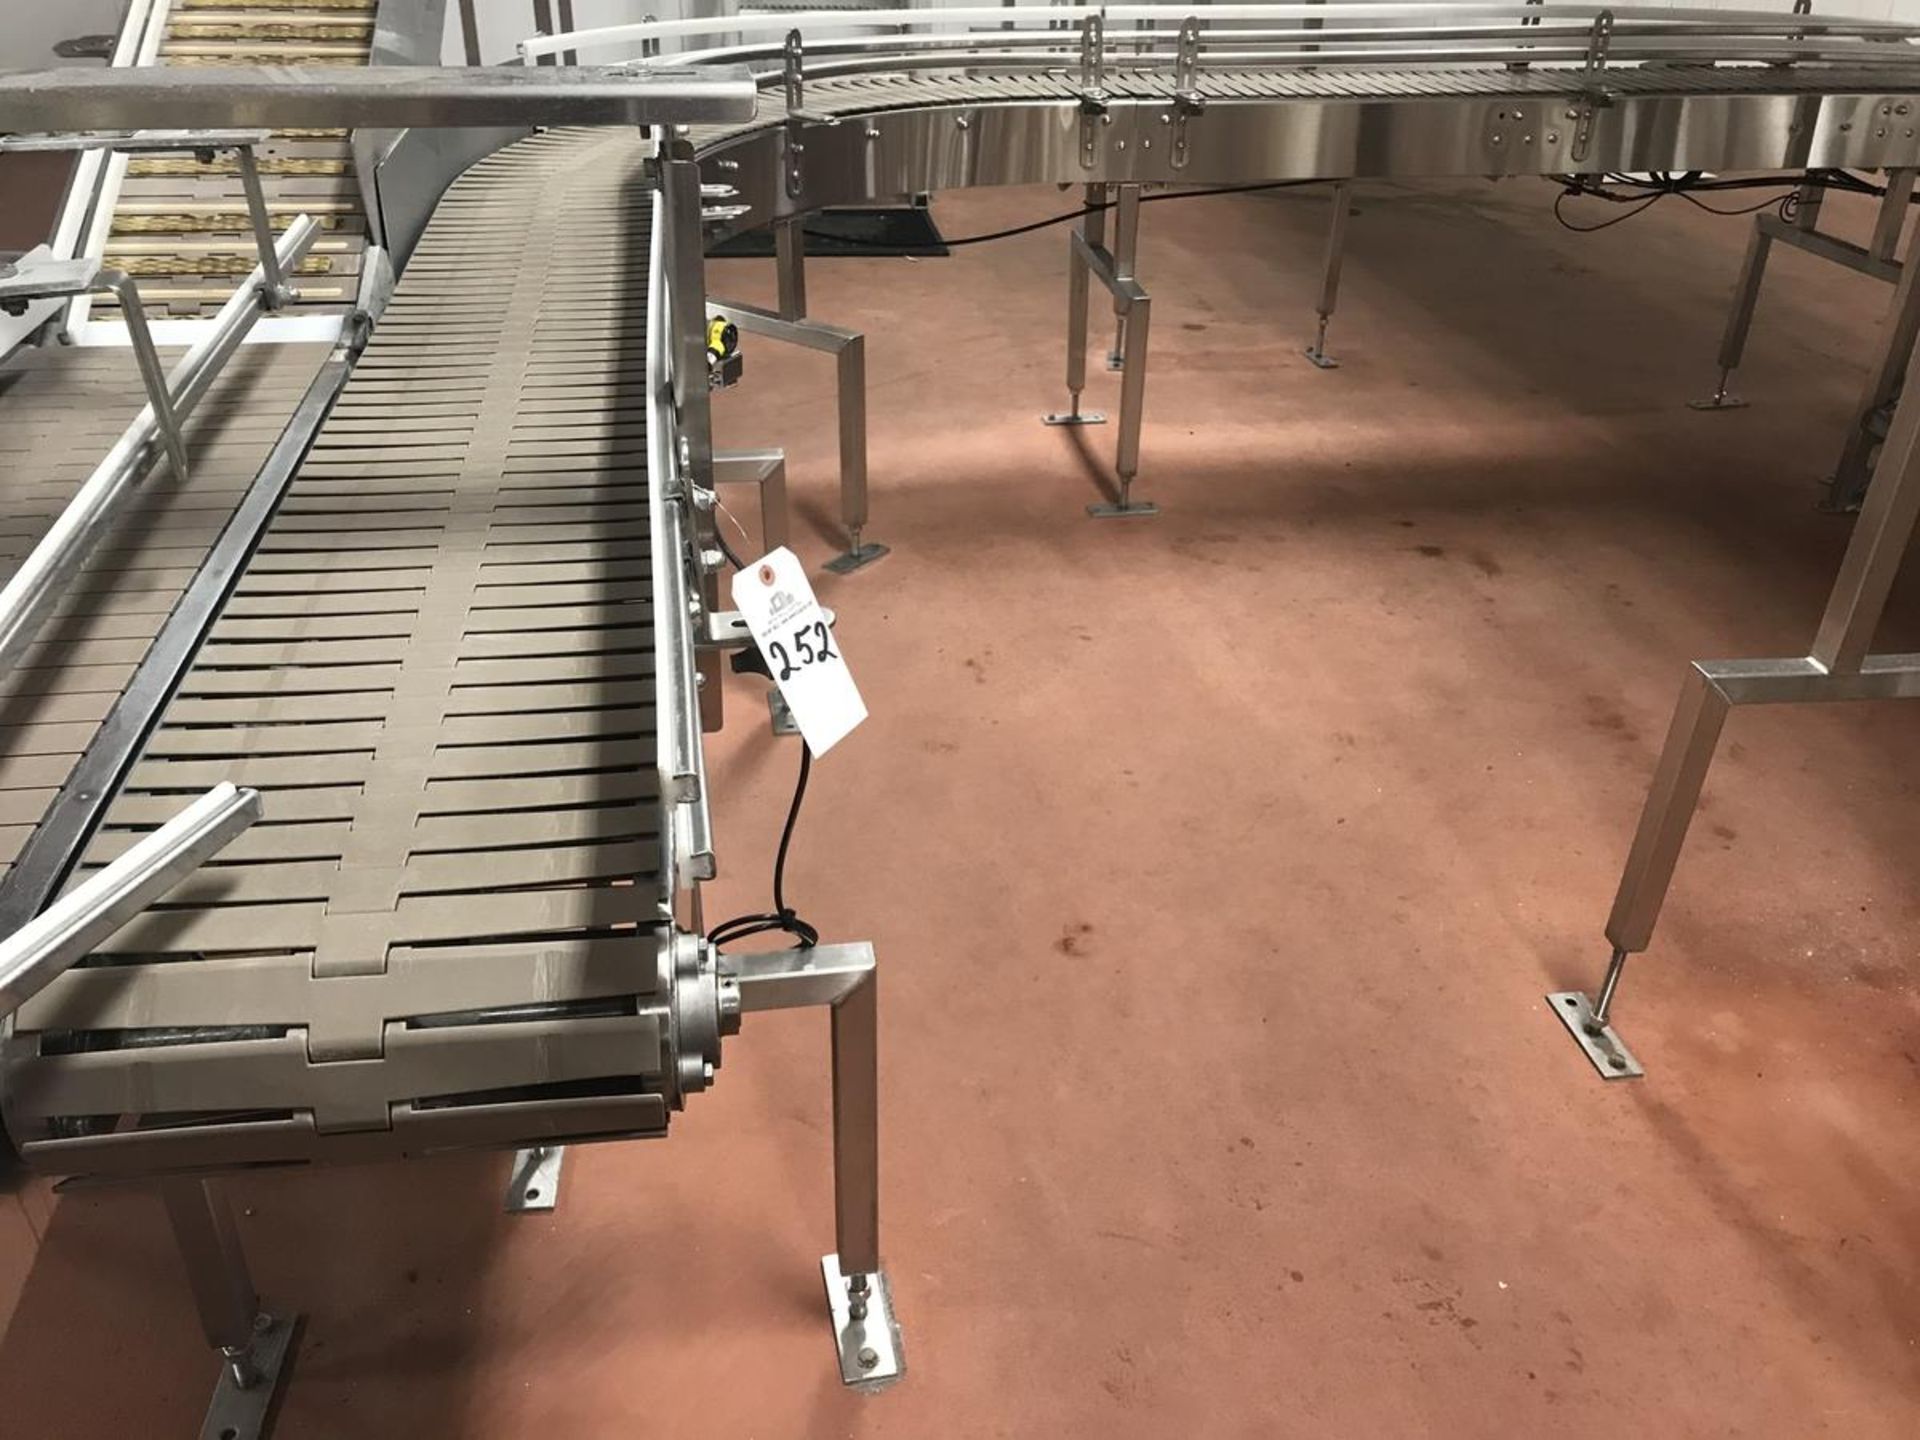 Stainless Steel Conveyor, Approx 12in Wide x 17ft Long | Rig Fee: $200 - Image 2 of 2